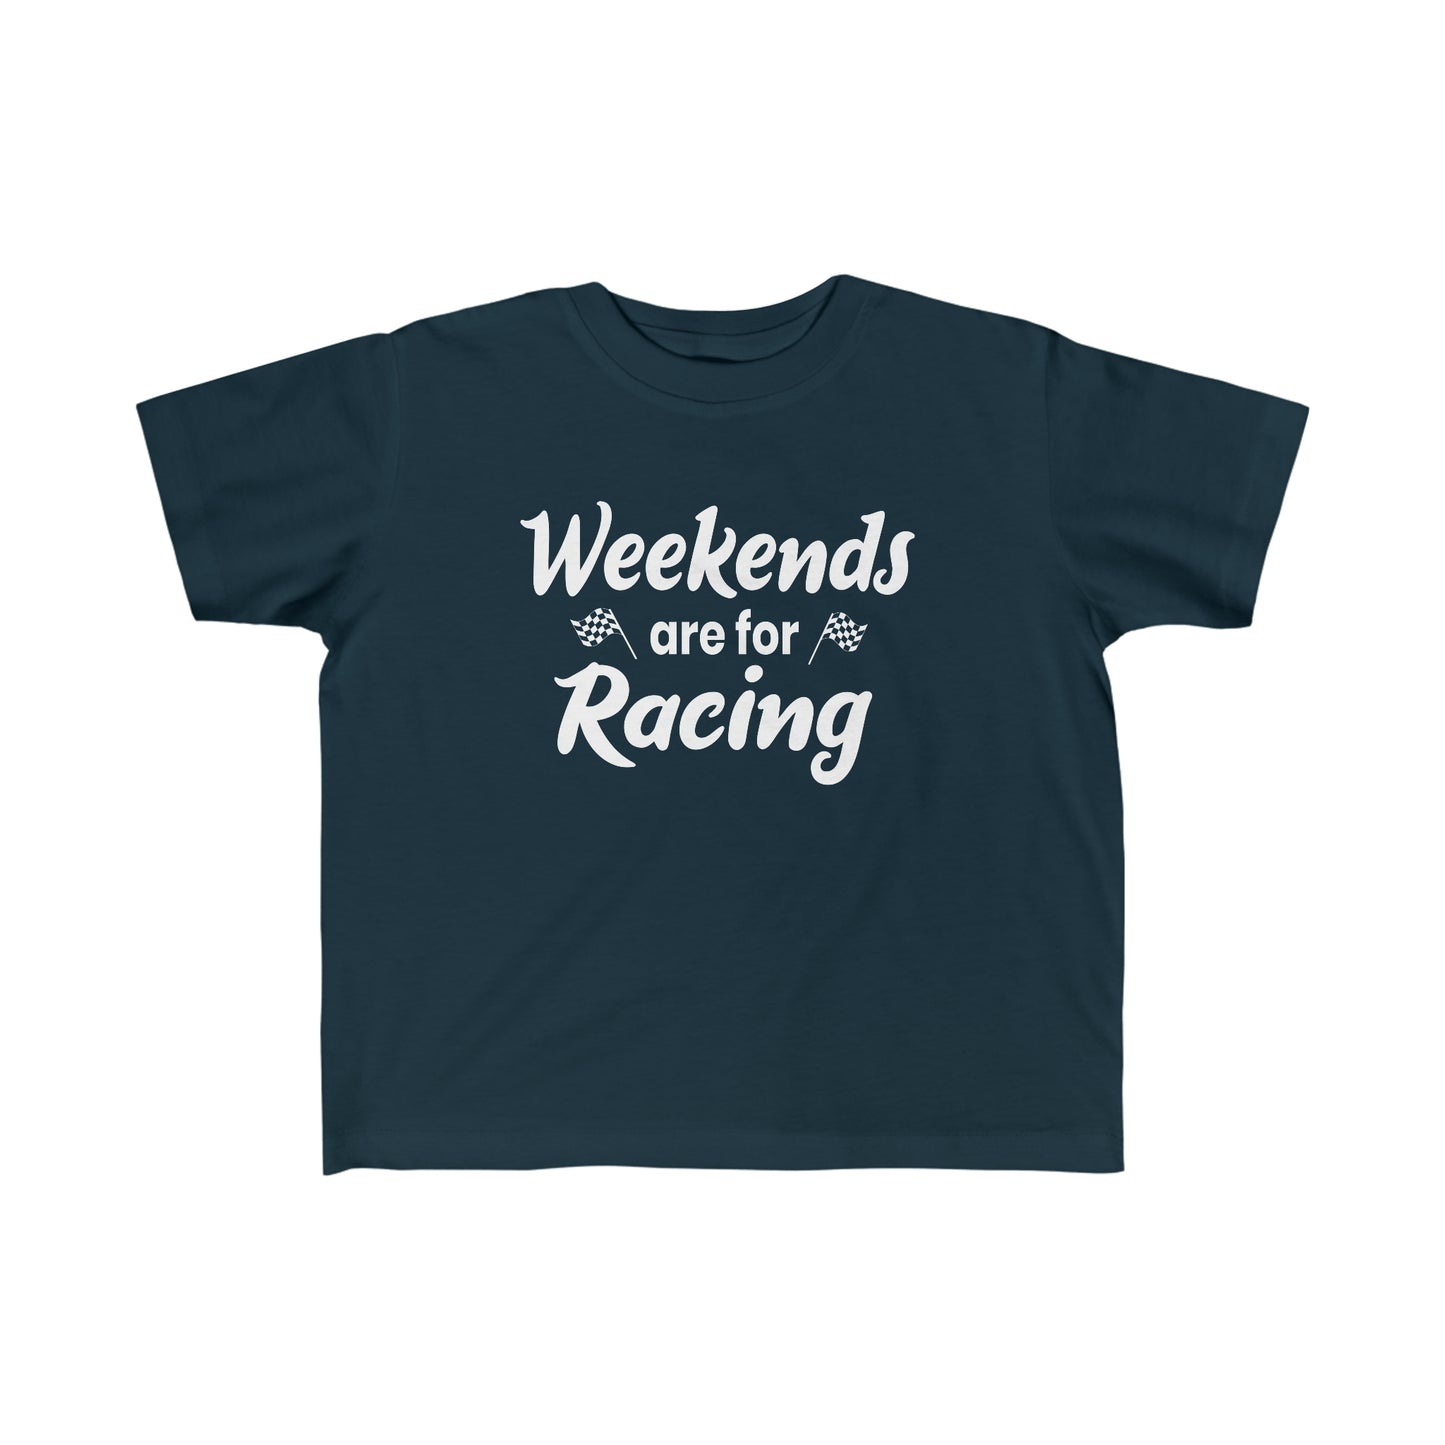 Weekends Are For Racing Toddler's Fine Jersey Tee